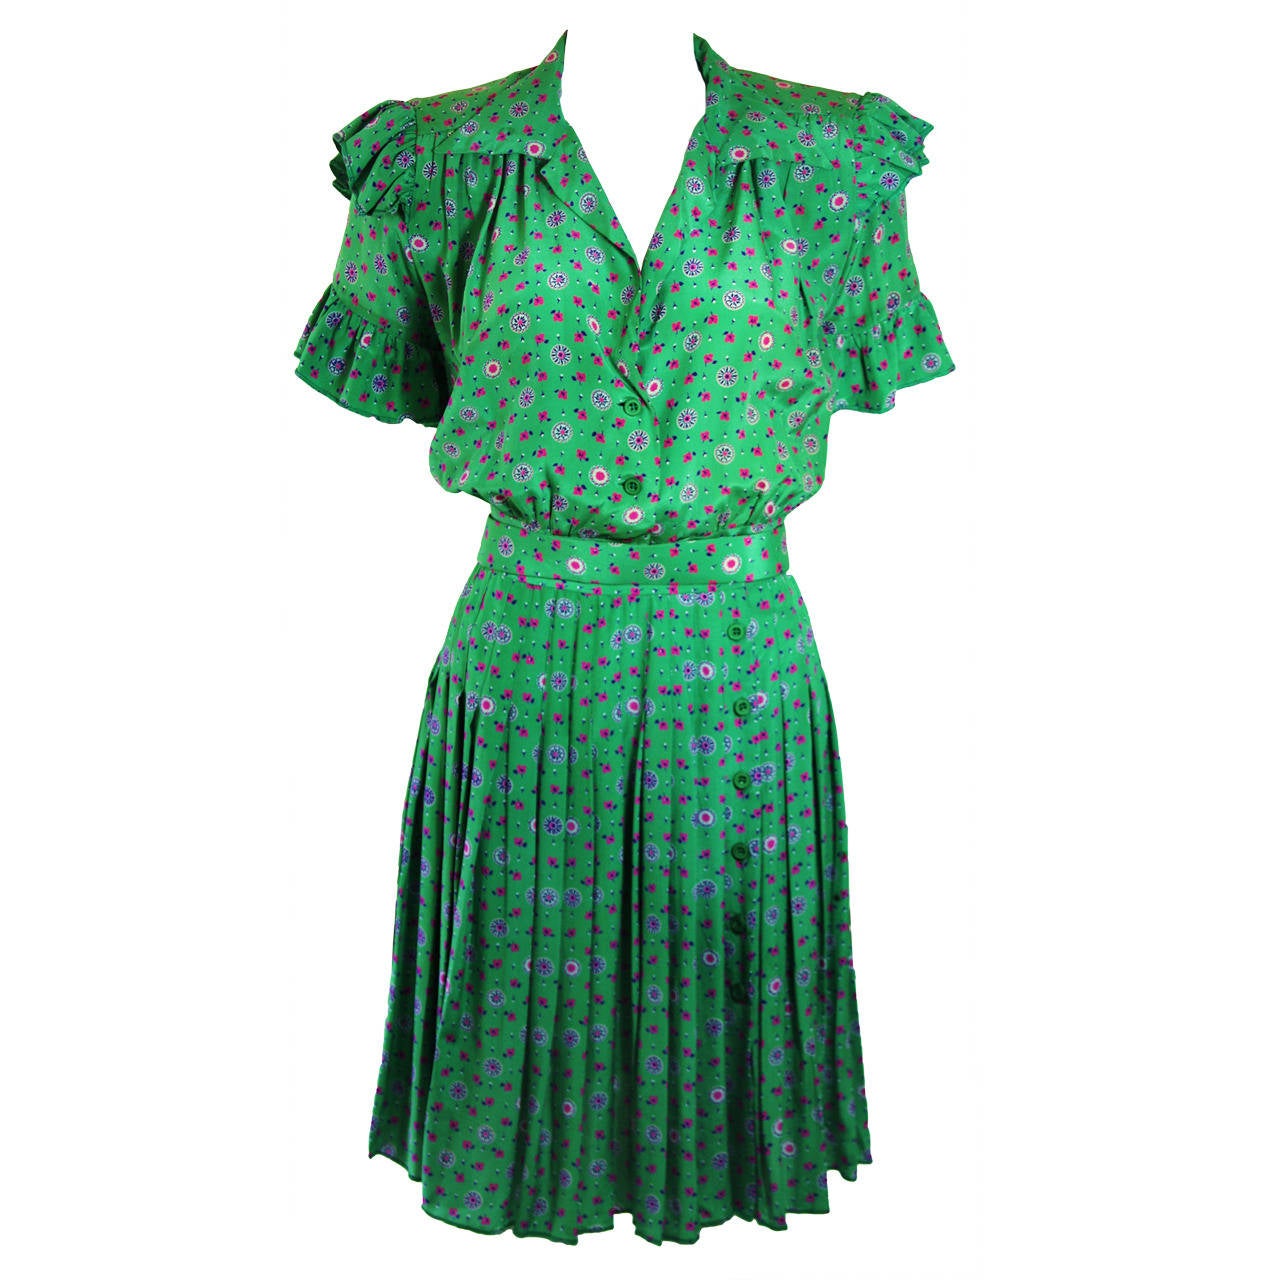 Nolan Miller Green Floral Silk Play Suit Ensemble with Skirt and Belt Size S